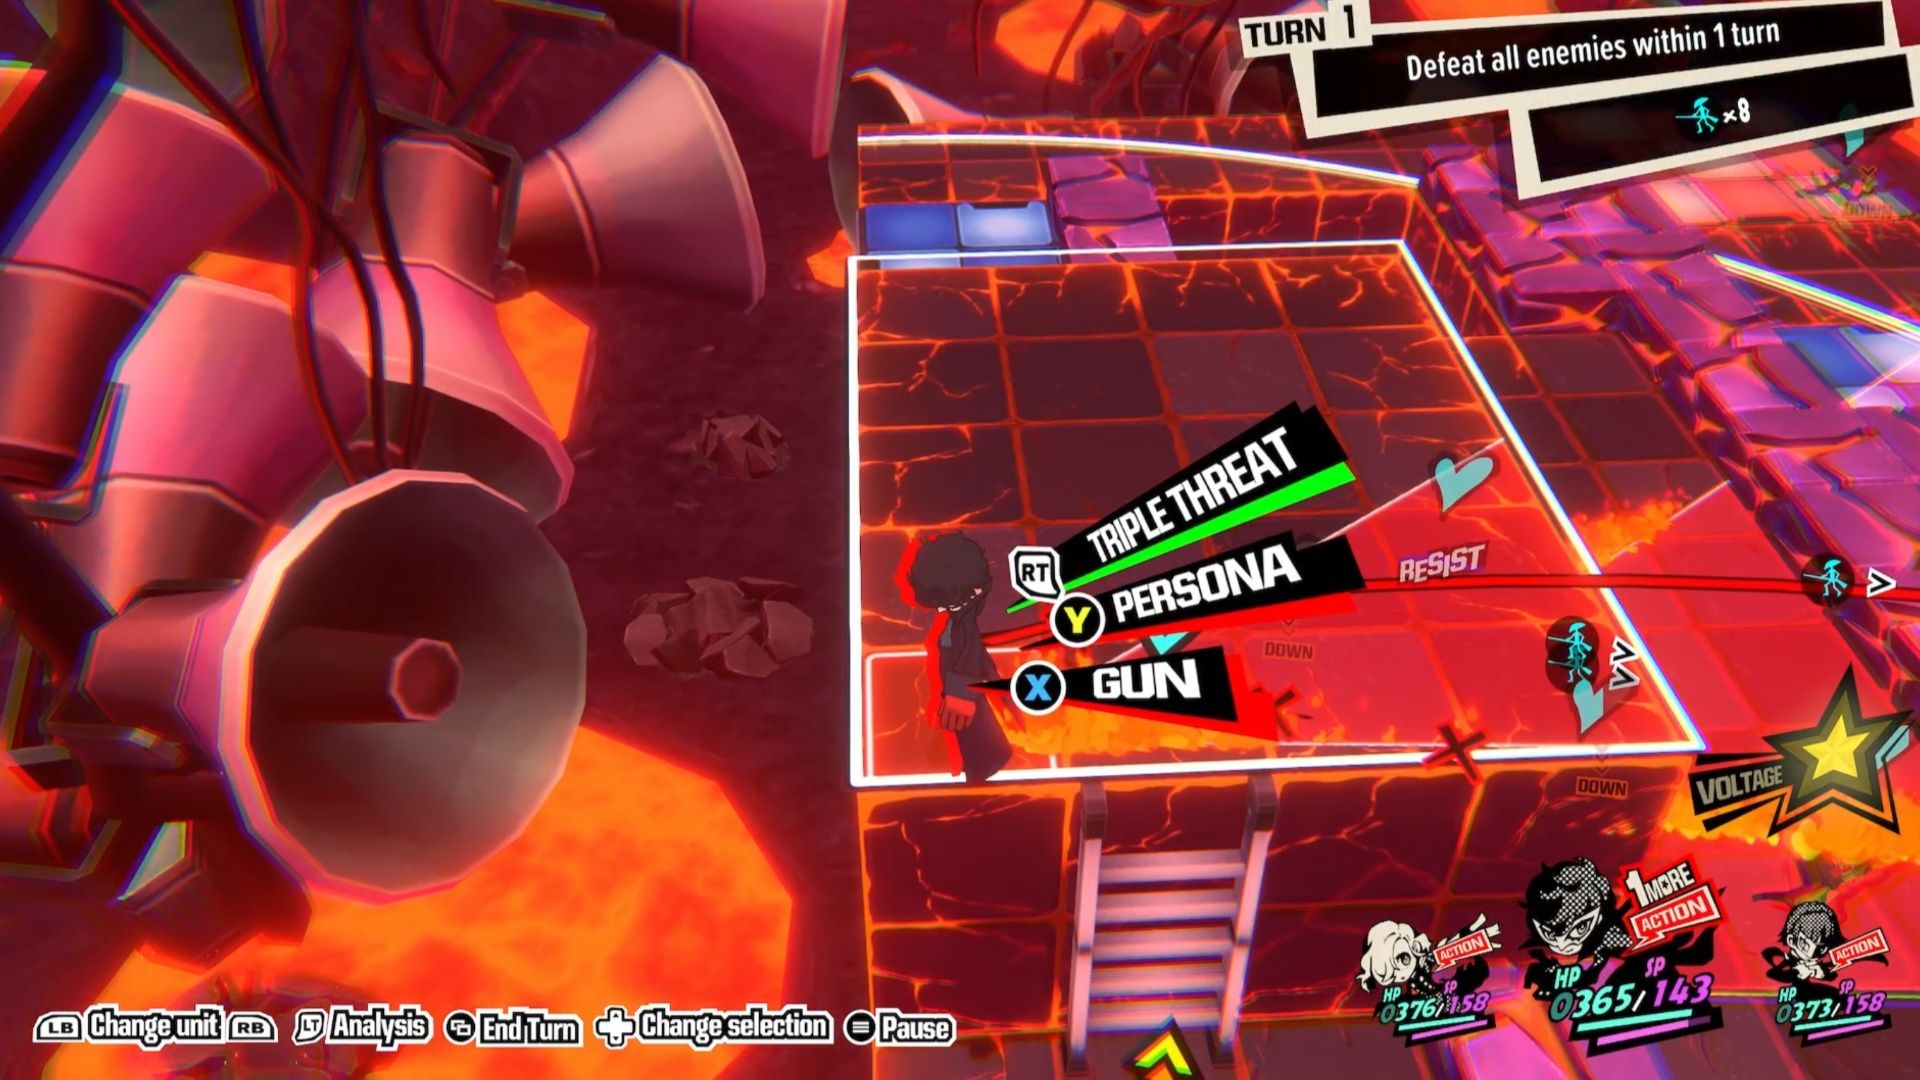 Joker stands in a spot to prepare for a Triple Threat during Quest 12 in Persona 5 Tactica.